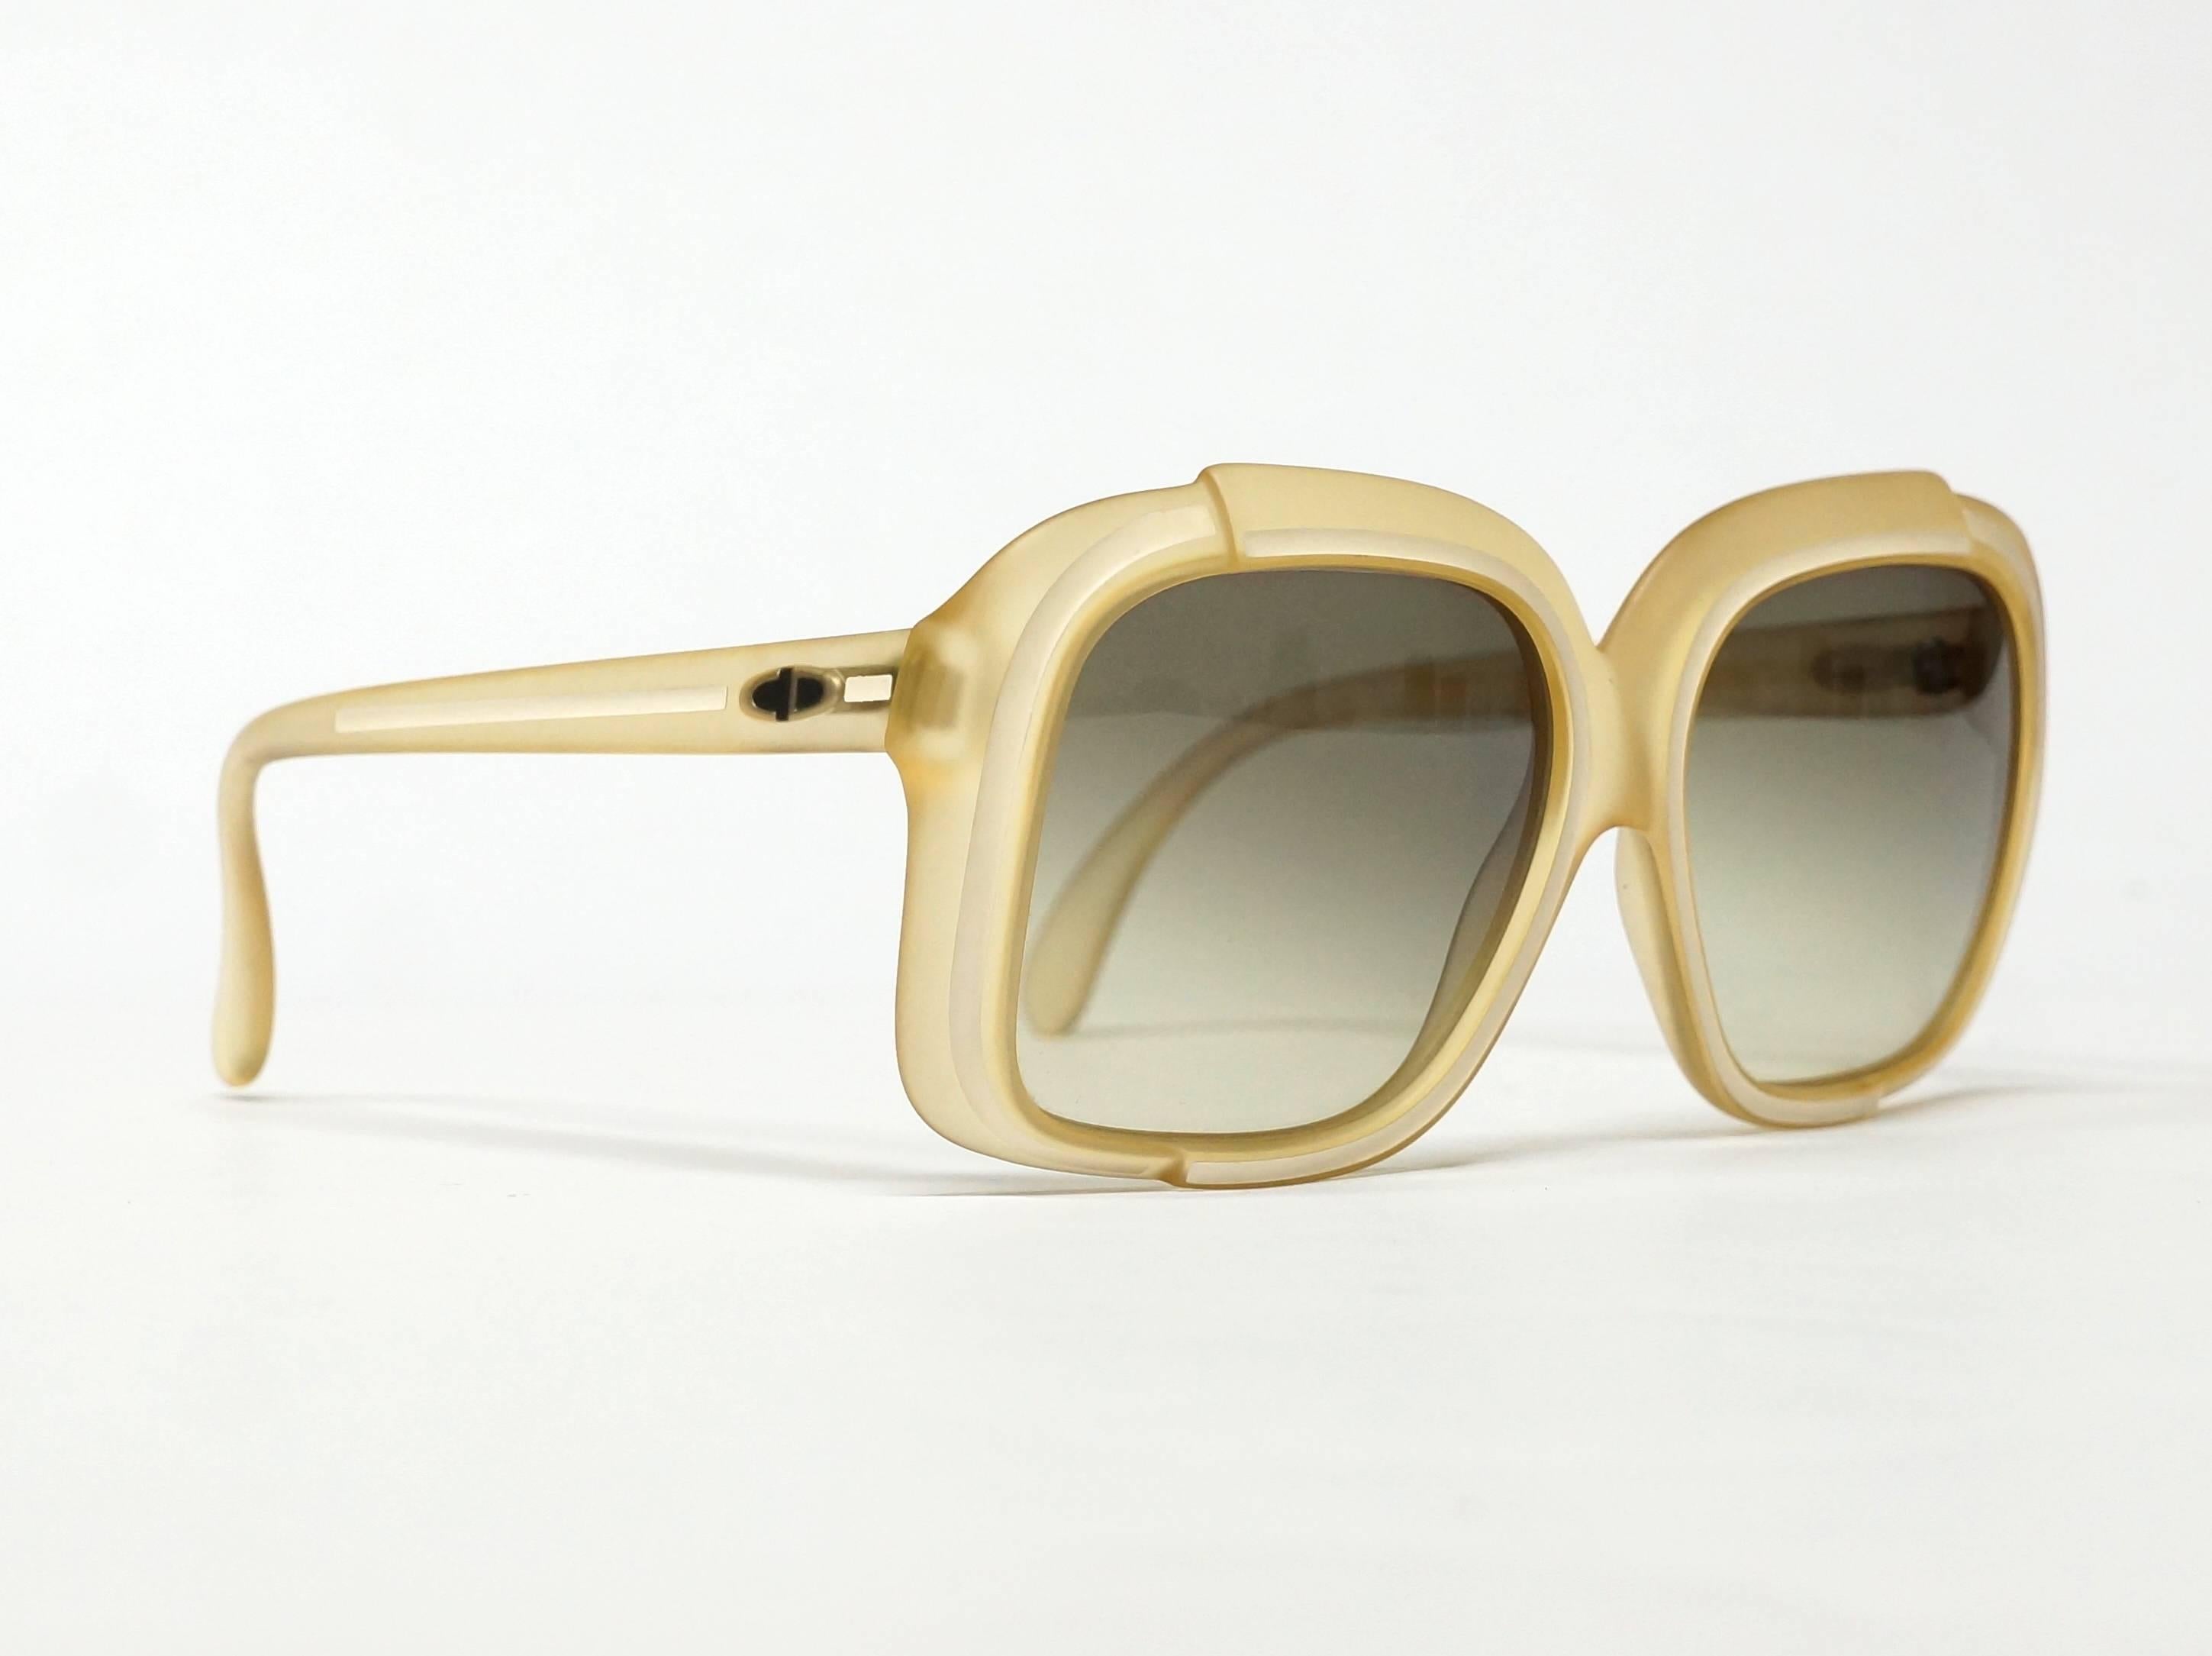 Beige 1970s Dior Sunglasses in New Old Stock Condition For Sale